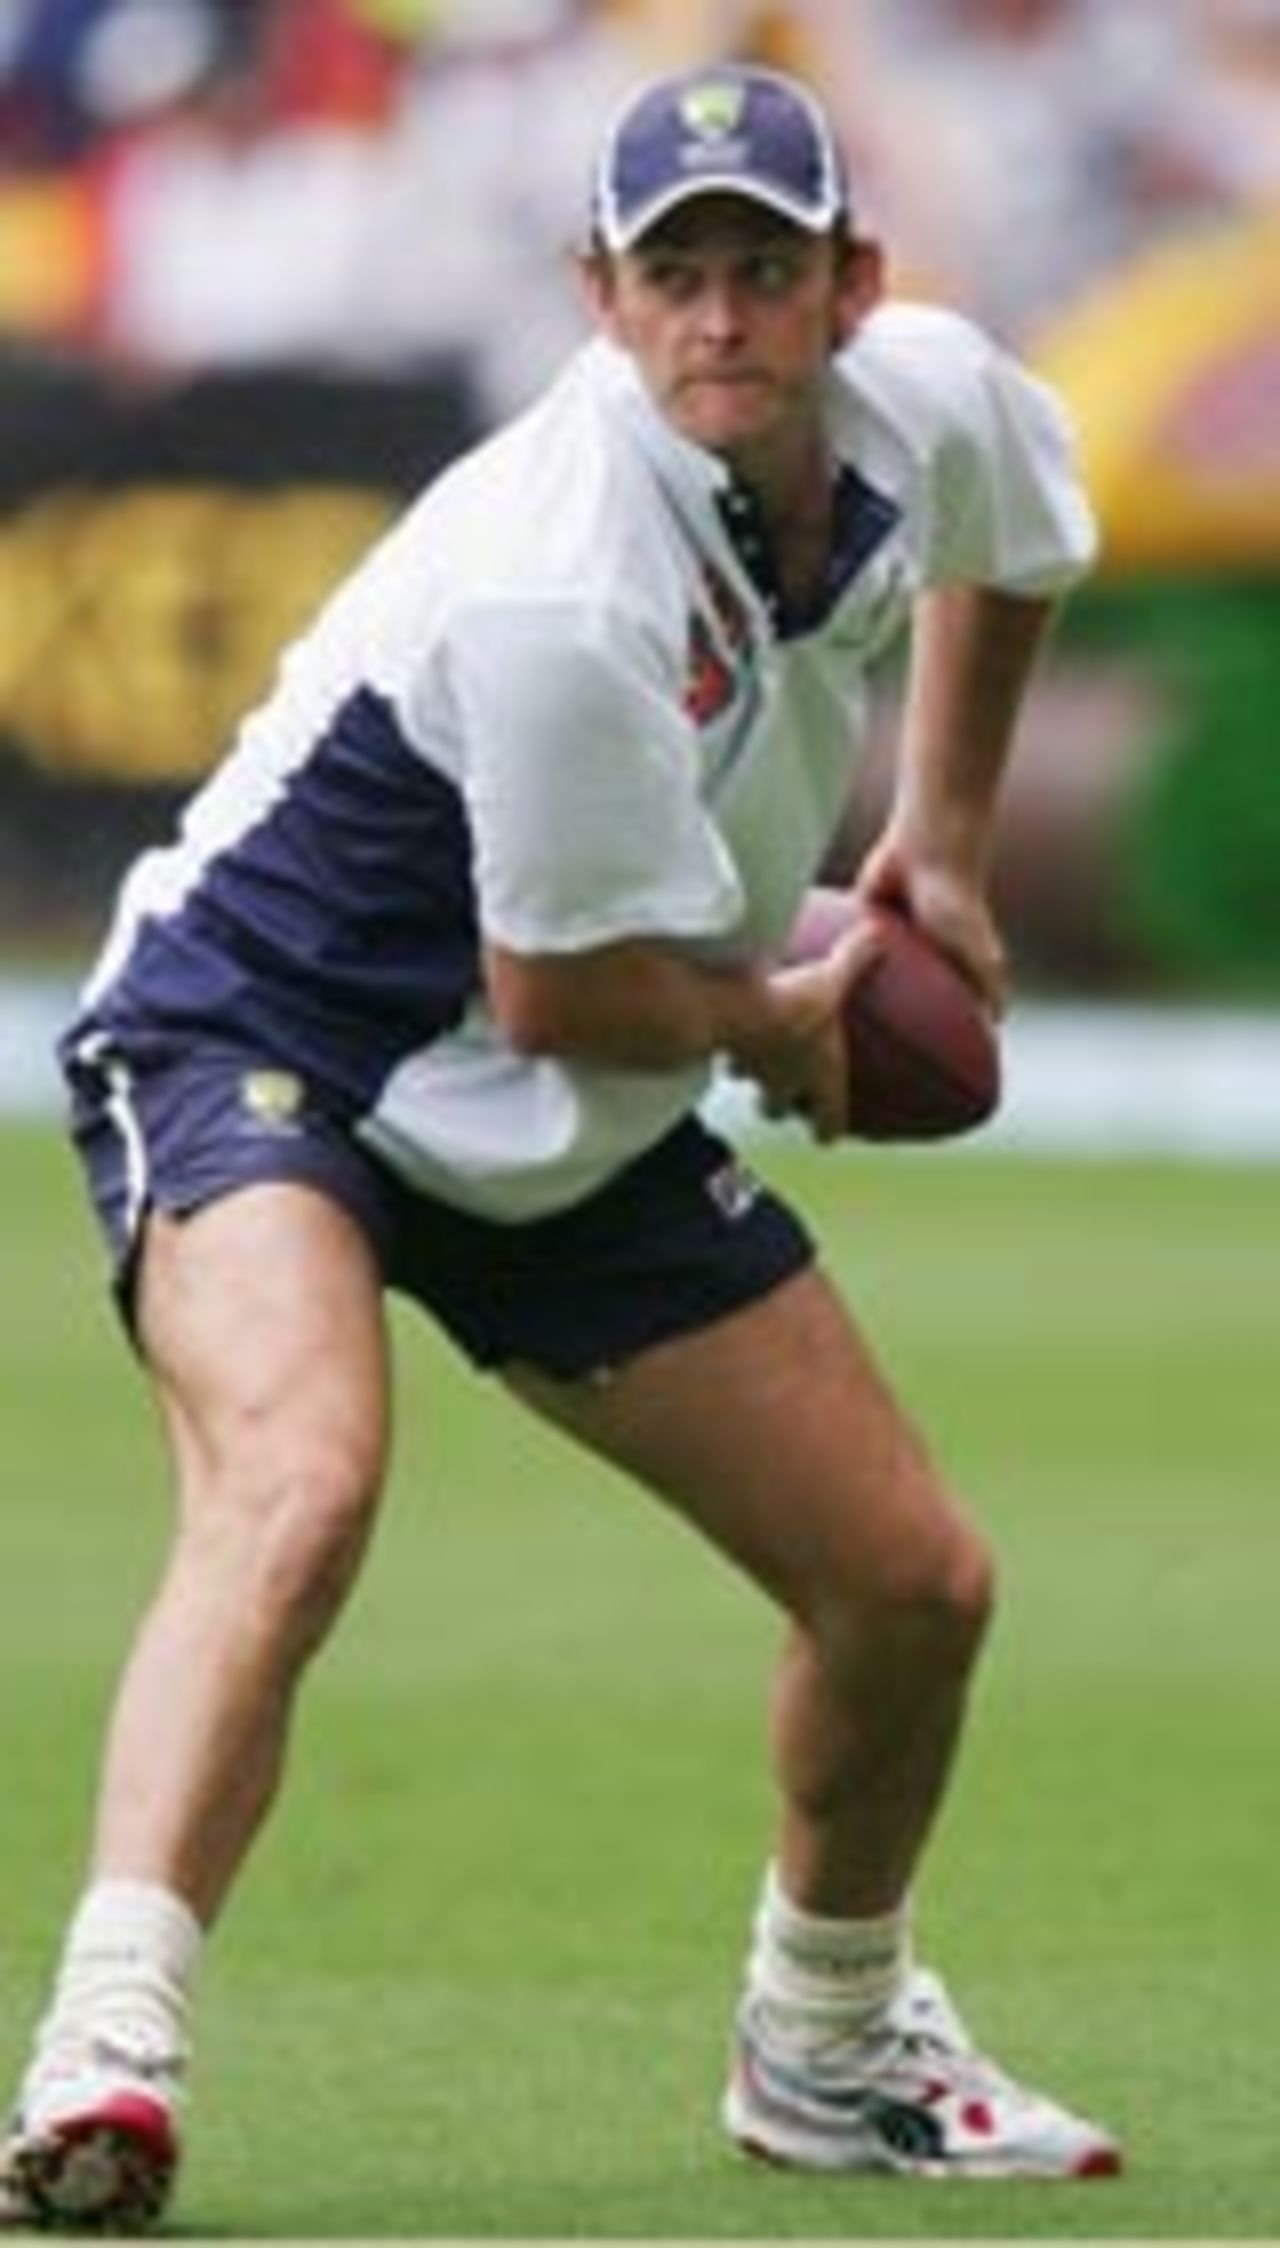 Adam Gilchrist playing rugby during the rain delay at the Gabba, Australia v New Zealand, 3rd ODI, December 10, 2004